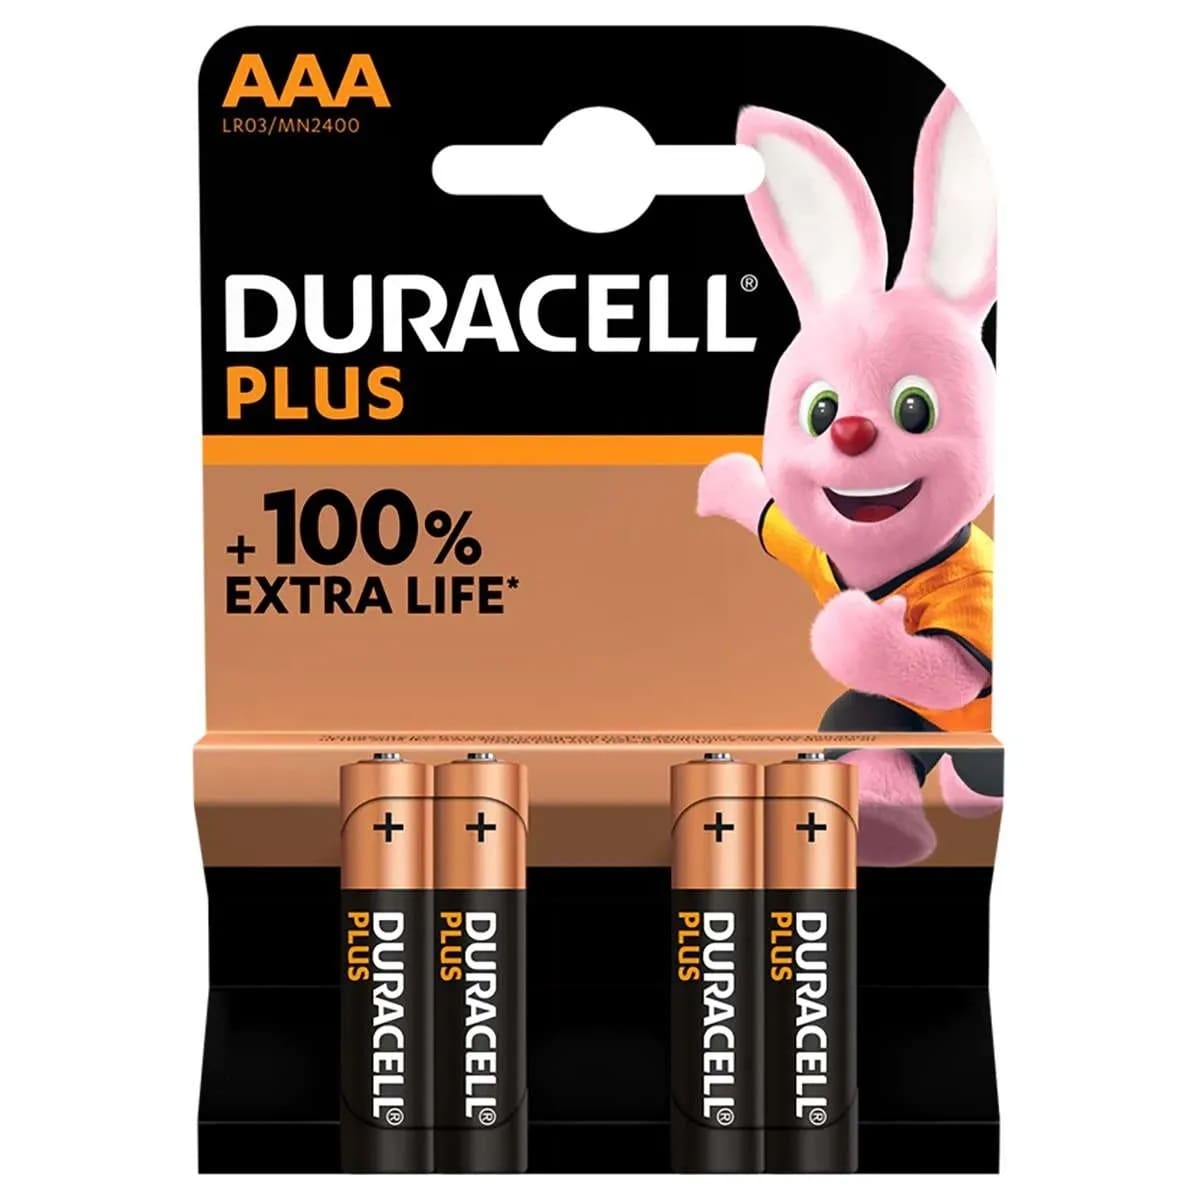 Duracell AAA Plus, Pack of 4 MN2400 Batteries